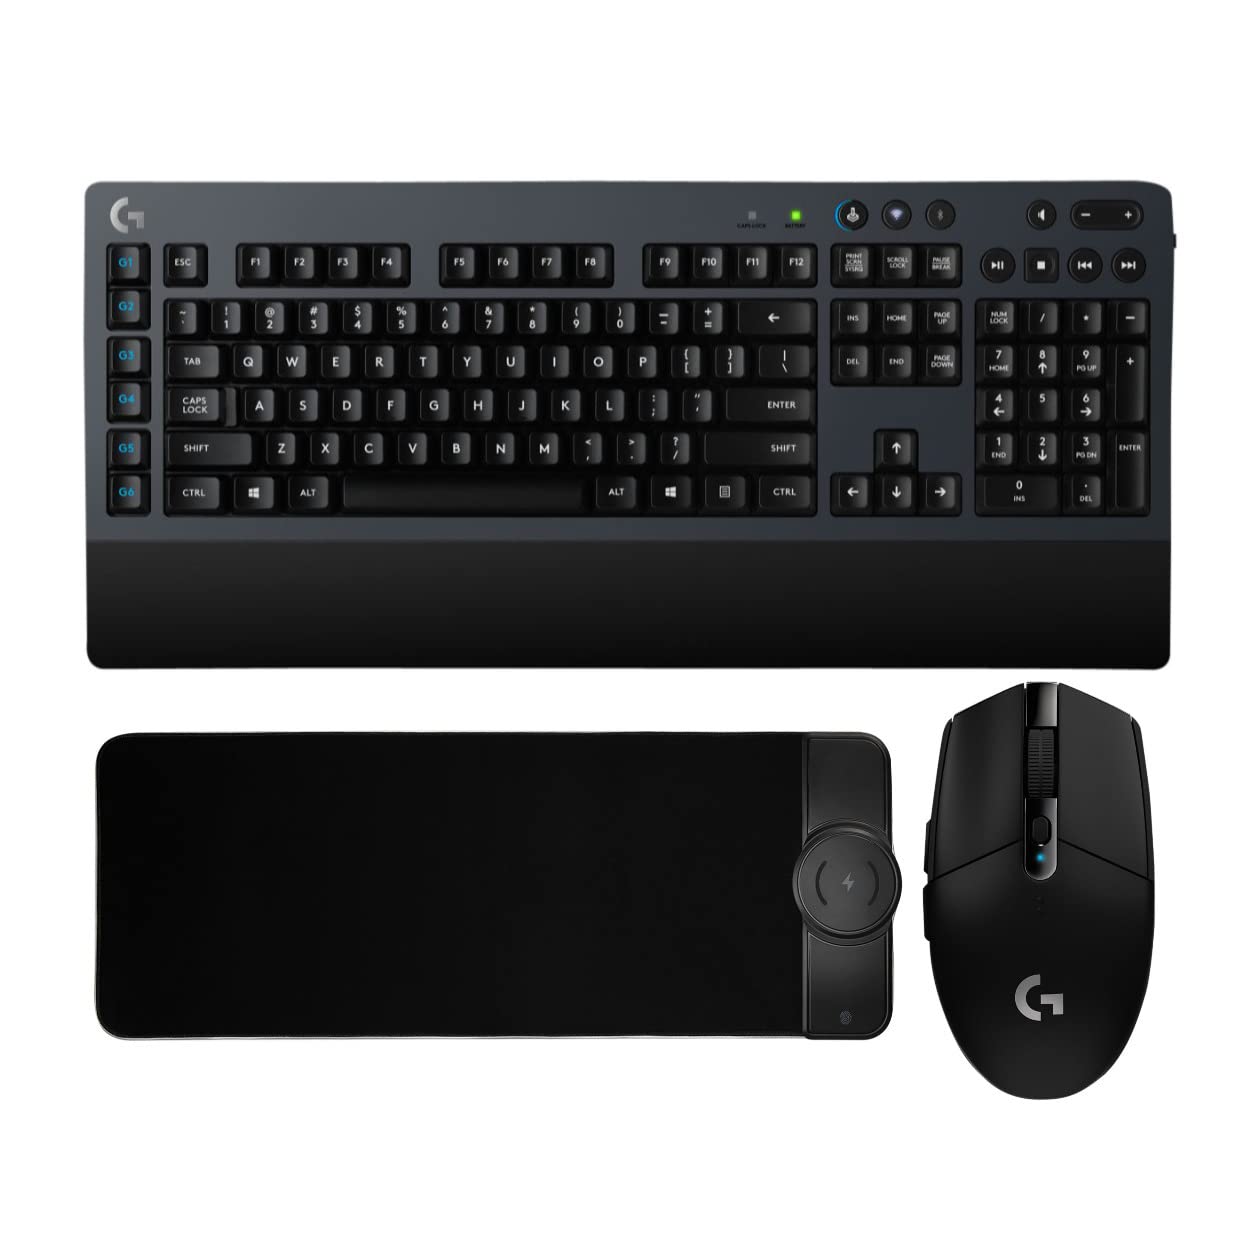 Logitech G613 Gaming Keyboard Bundle With Logitech G305 Gaming Mouse and Pad Bundle (3 Items)